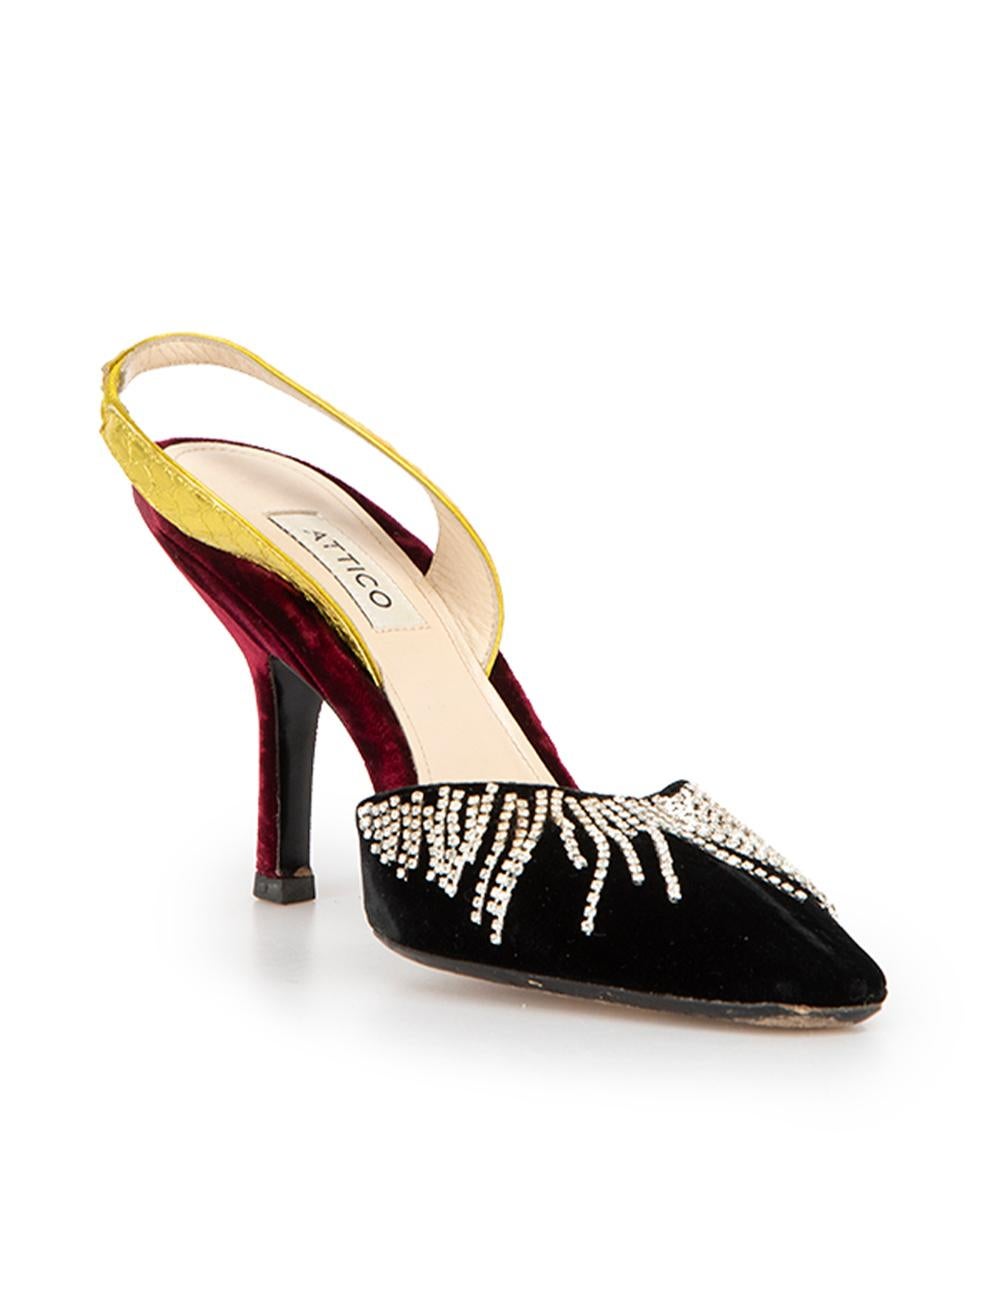 CONDITION is Very good. Minimal wear to shoes is evident. Minimal wear to the left shoe with a small chip to the sole and glue visible to the crystal embellishment on this used Attico designer resale item. 



Details


Black, burgundy and